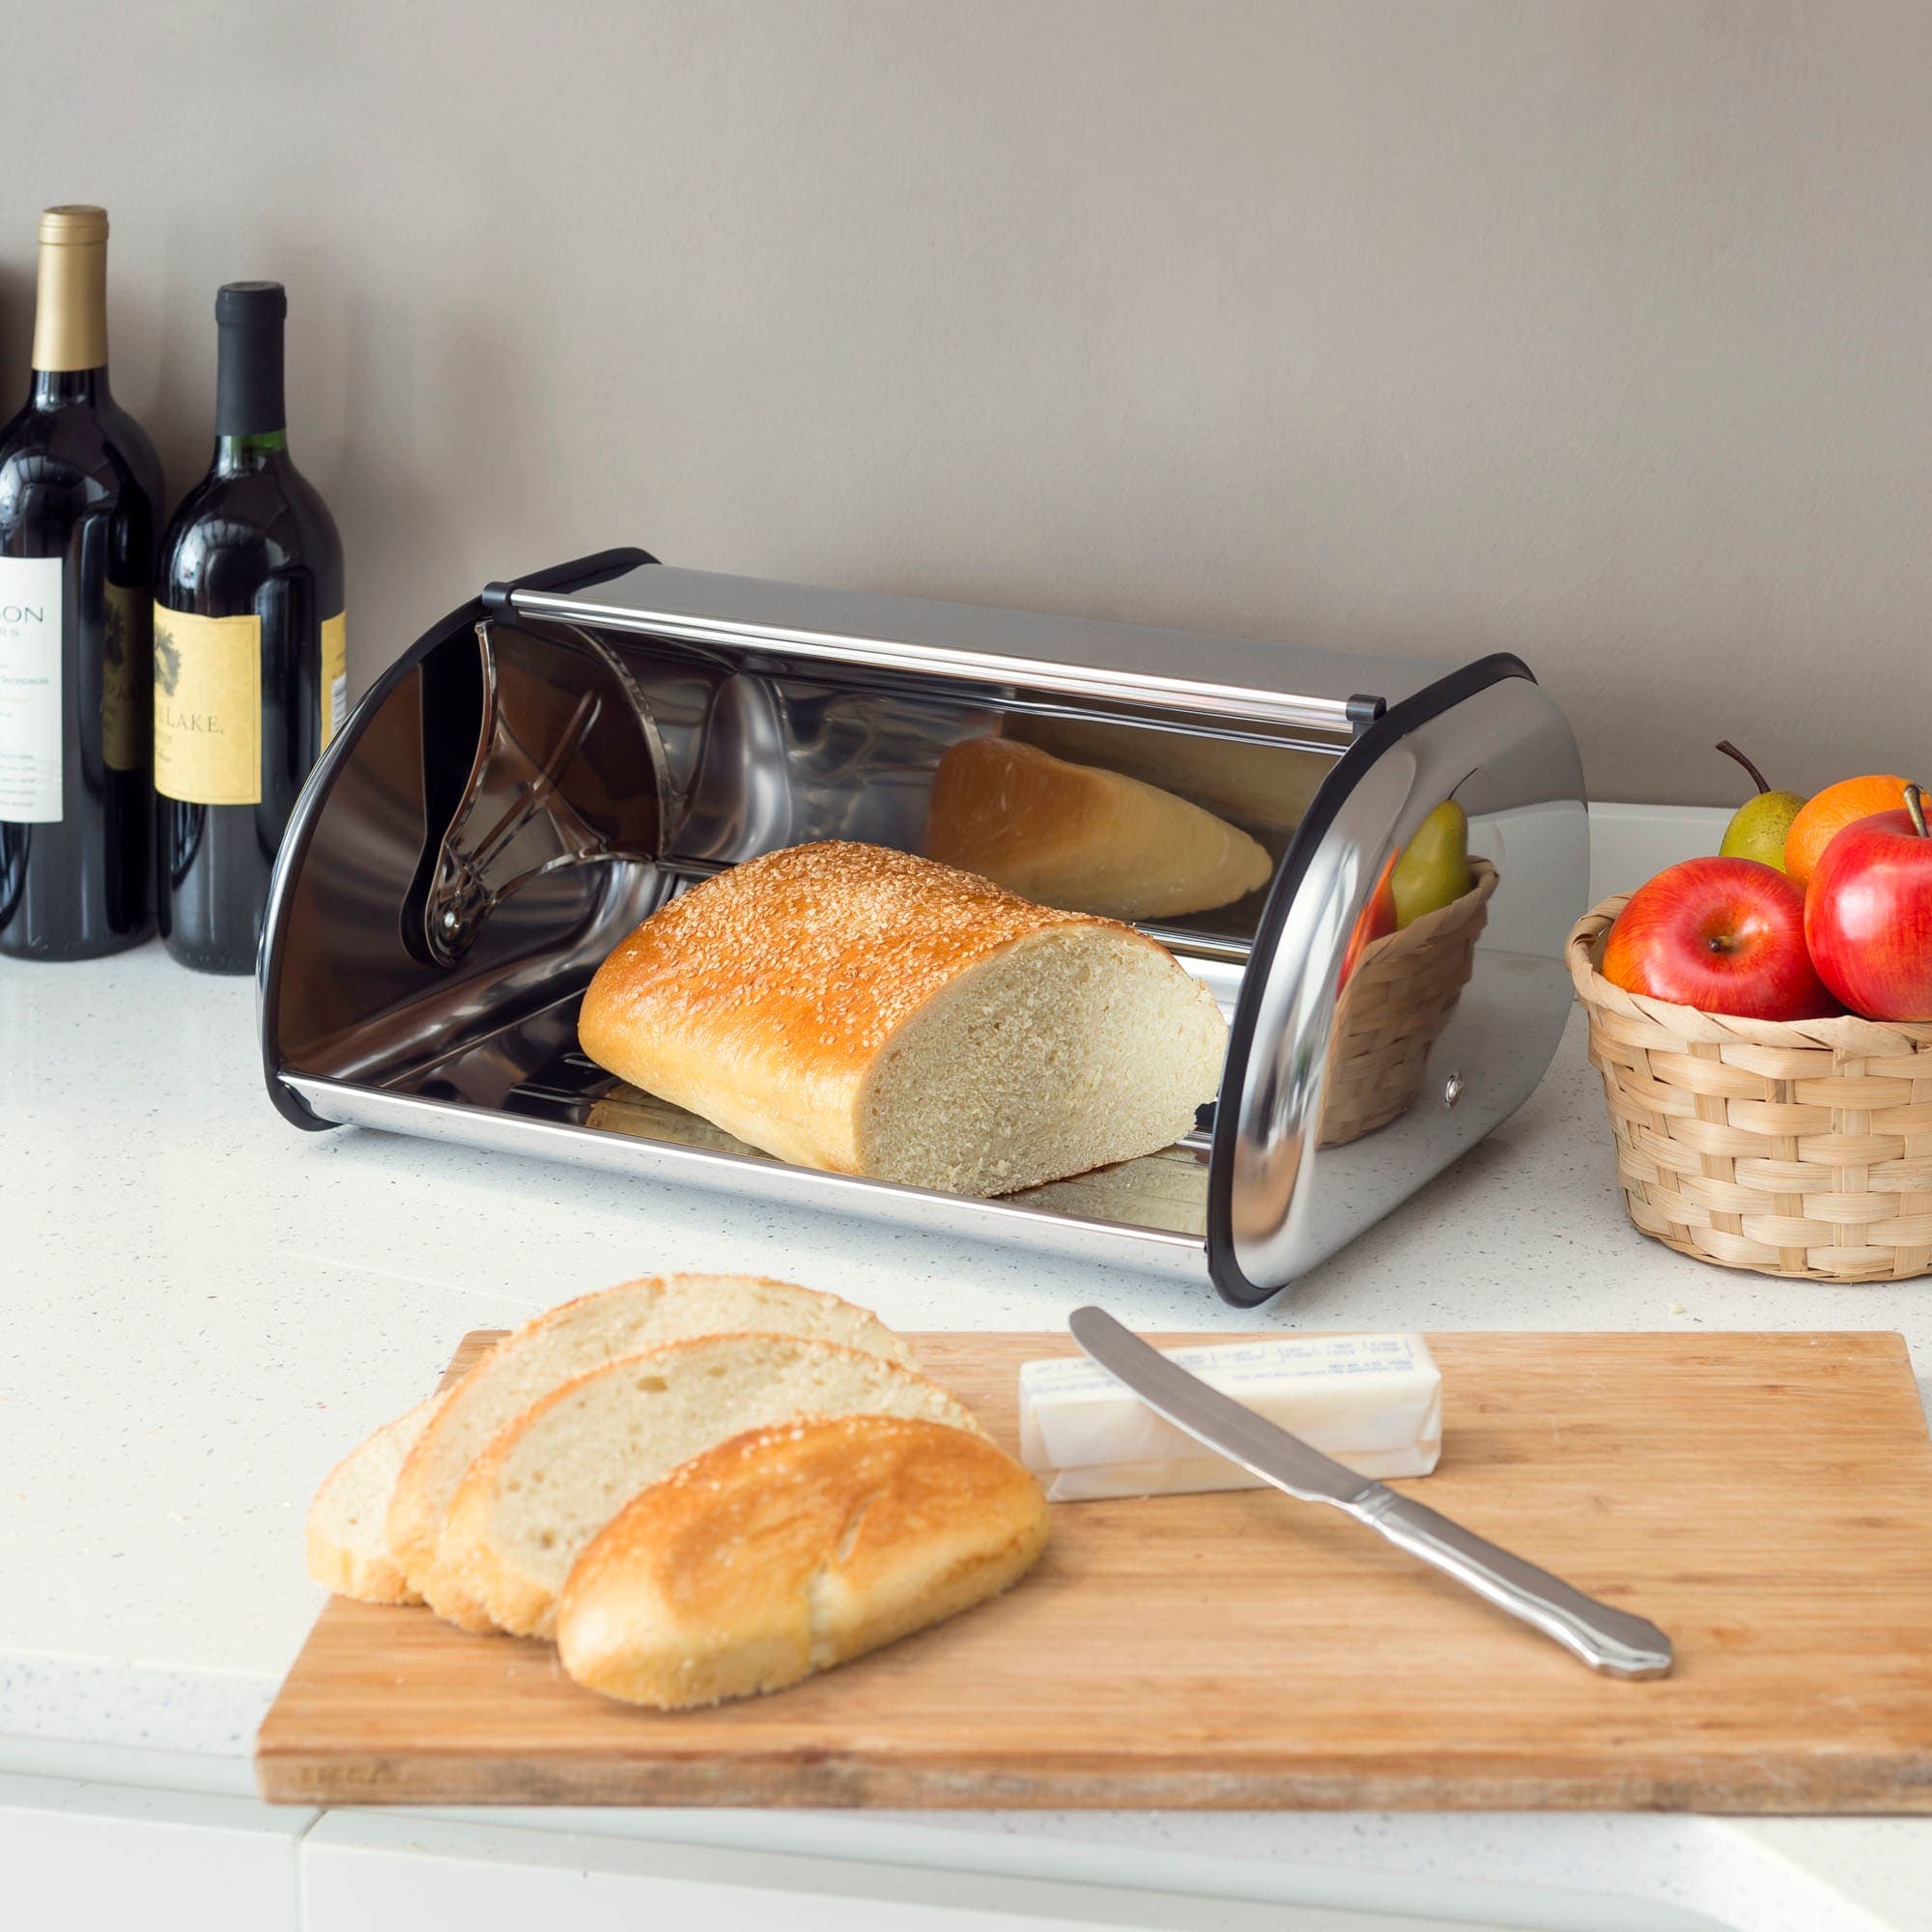 Home Basics Roll-Top Lid Stainless Steel Bread Box, Silver $20.00 EACH, CASE PACK OF 6